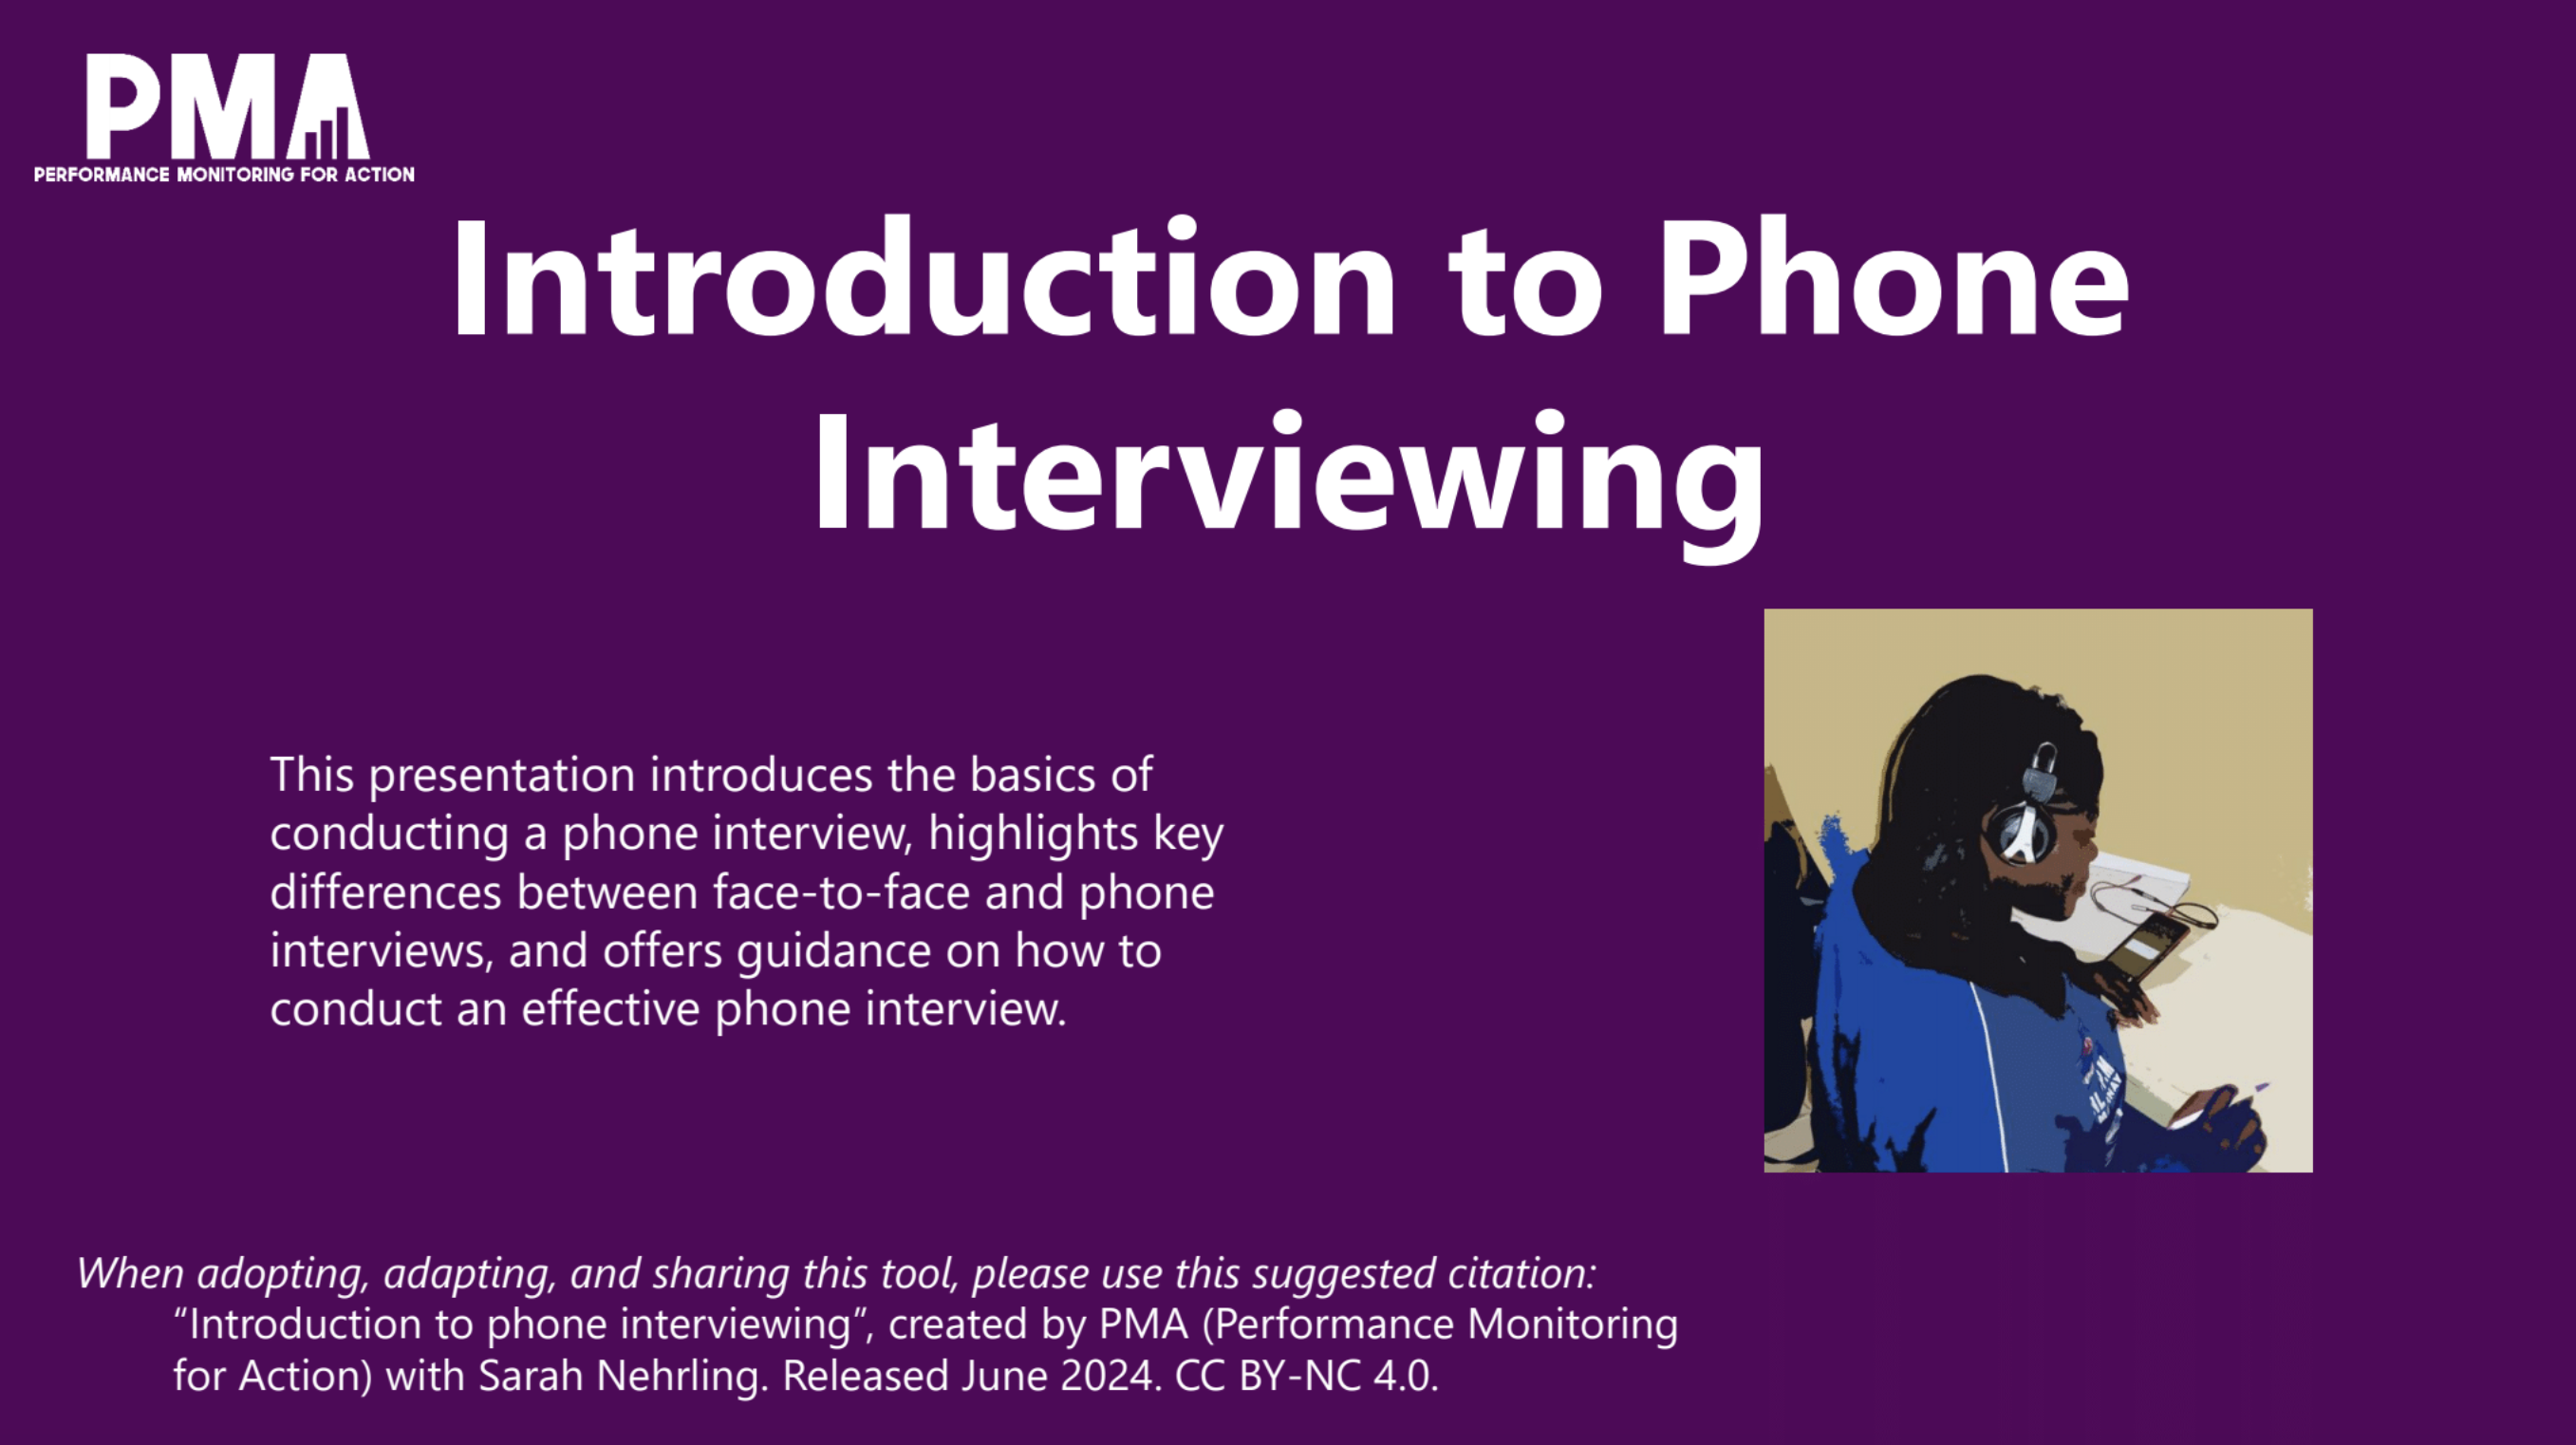 Introduction to Phone Interviewing